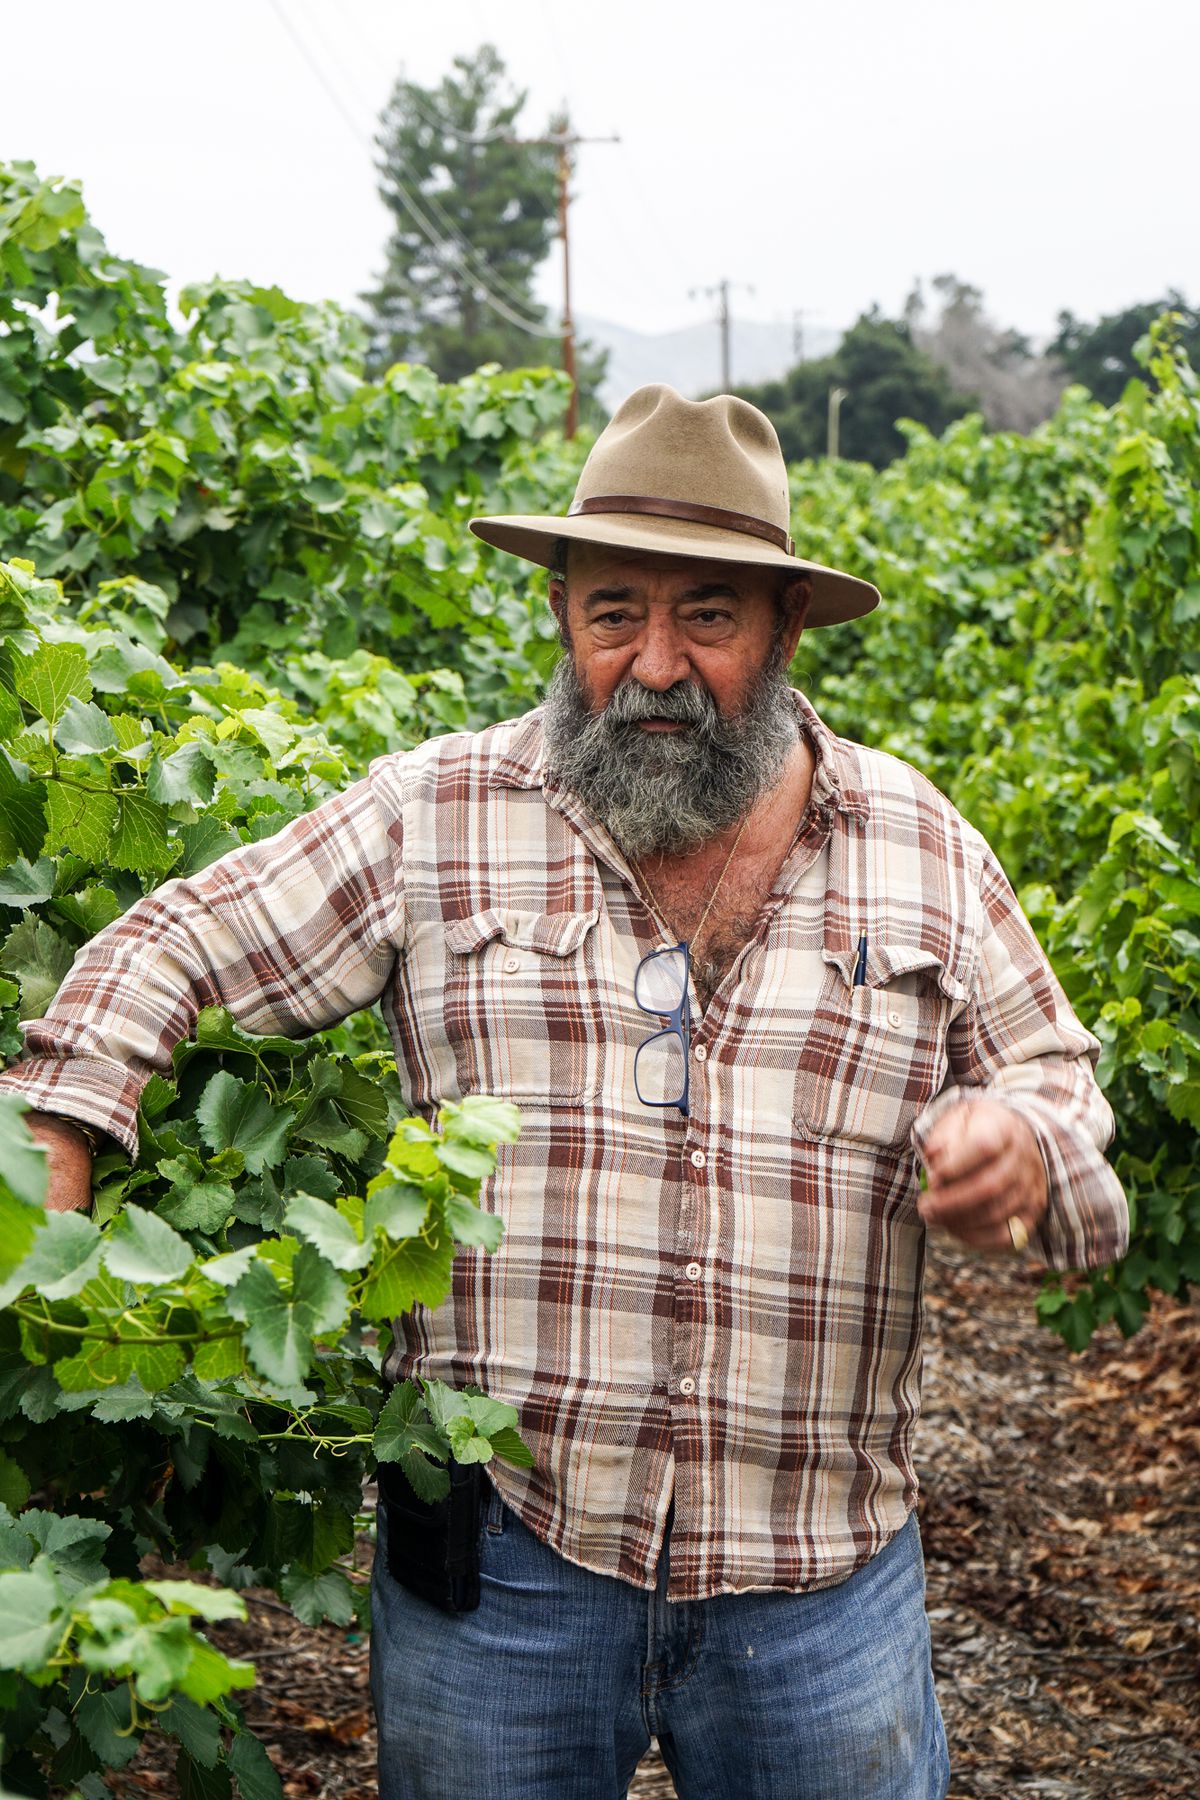 A man with large grey beard and hat walks between grape leaves on a cloudy day.